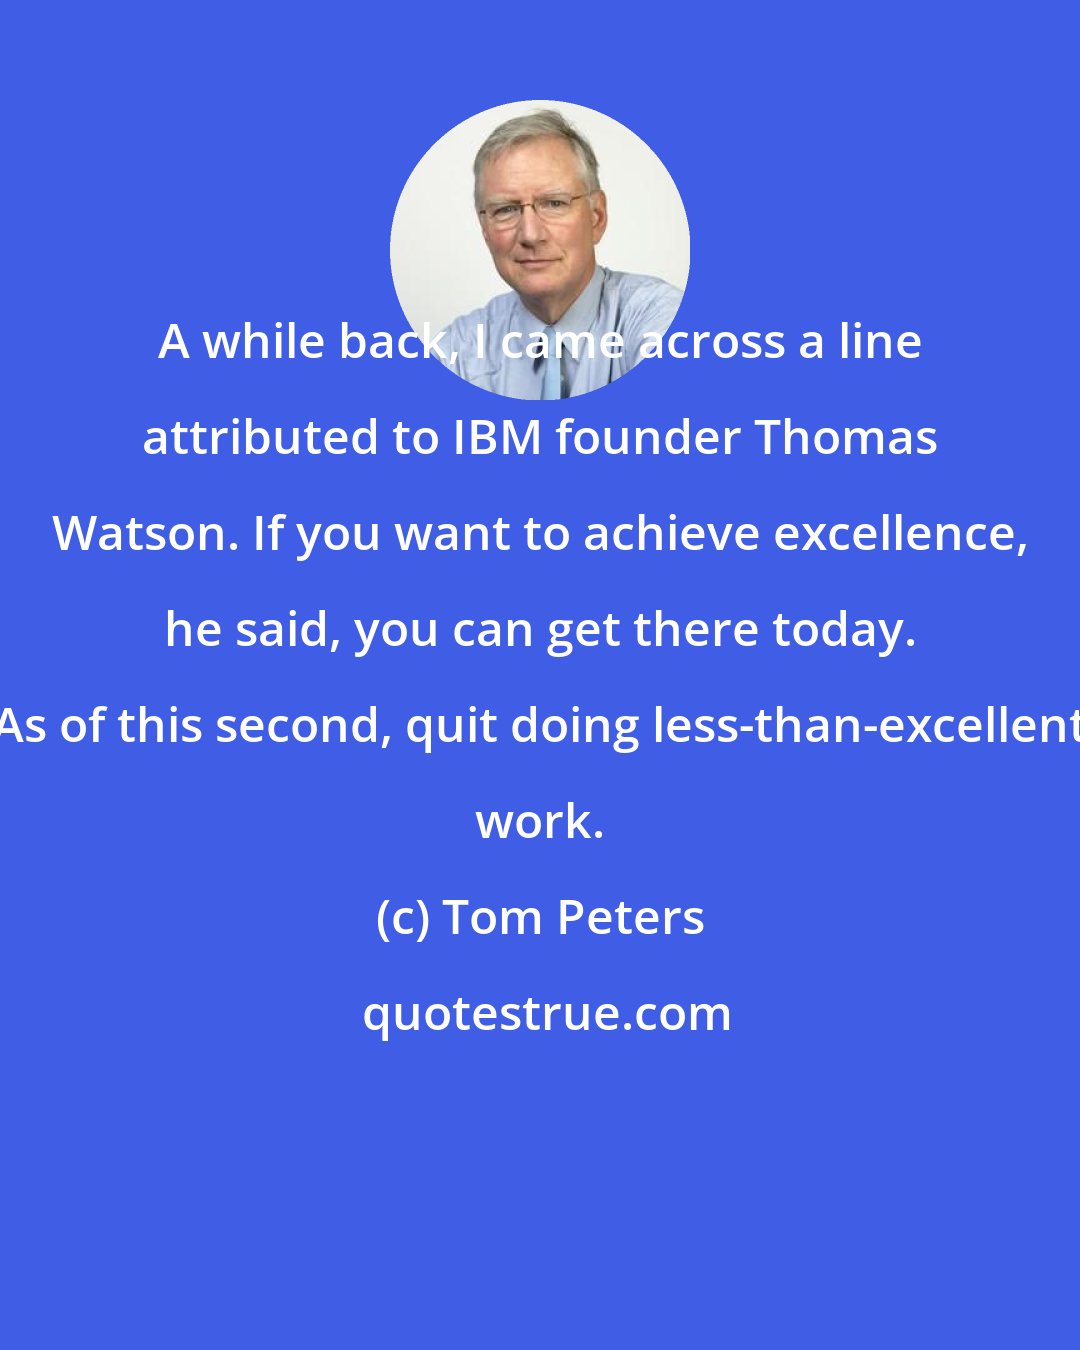 Tom Peters: A while back, I came across a line attributed to IBM founder Thomas Watson. If you want to achieve excellence, he said, you can get there today. As of this second, quit doing less-than-excellent work.